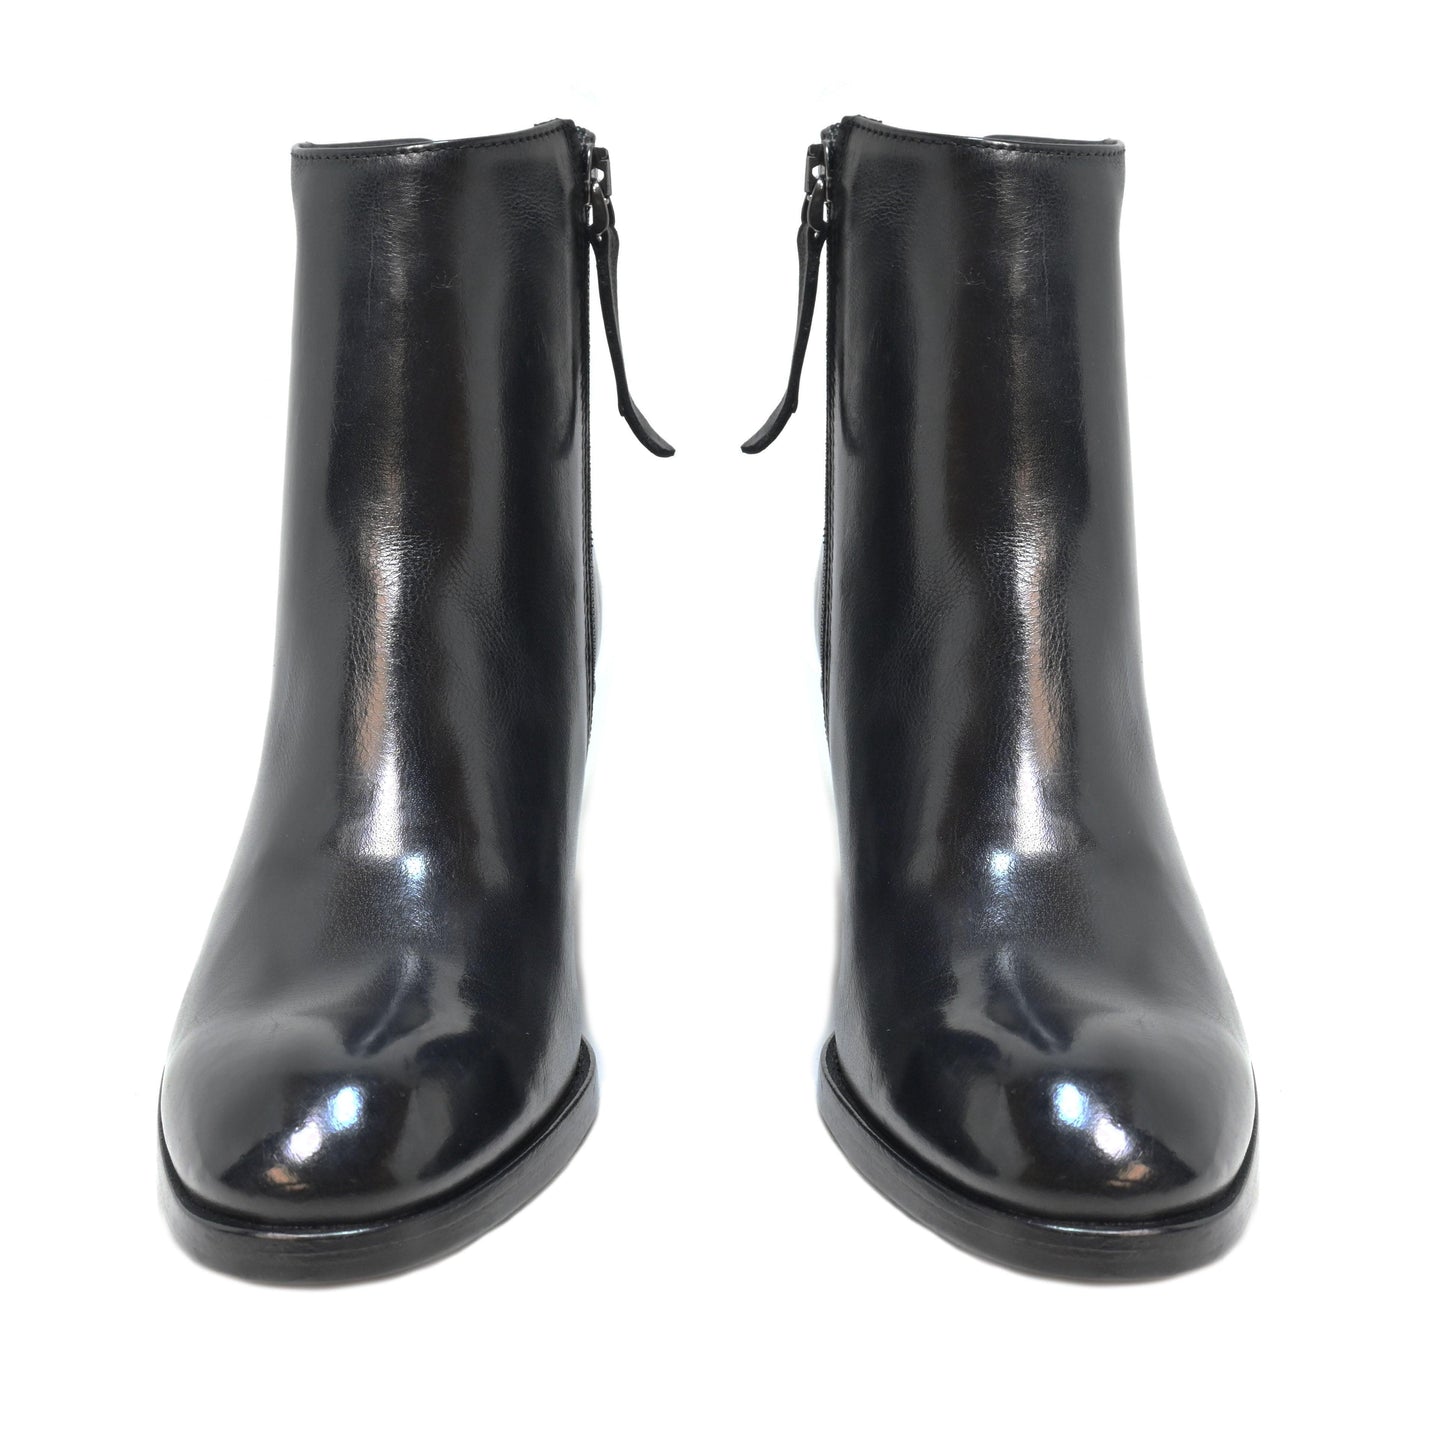 IDA 01 - ankle boots leather BLACK - History541